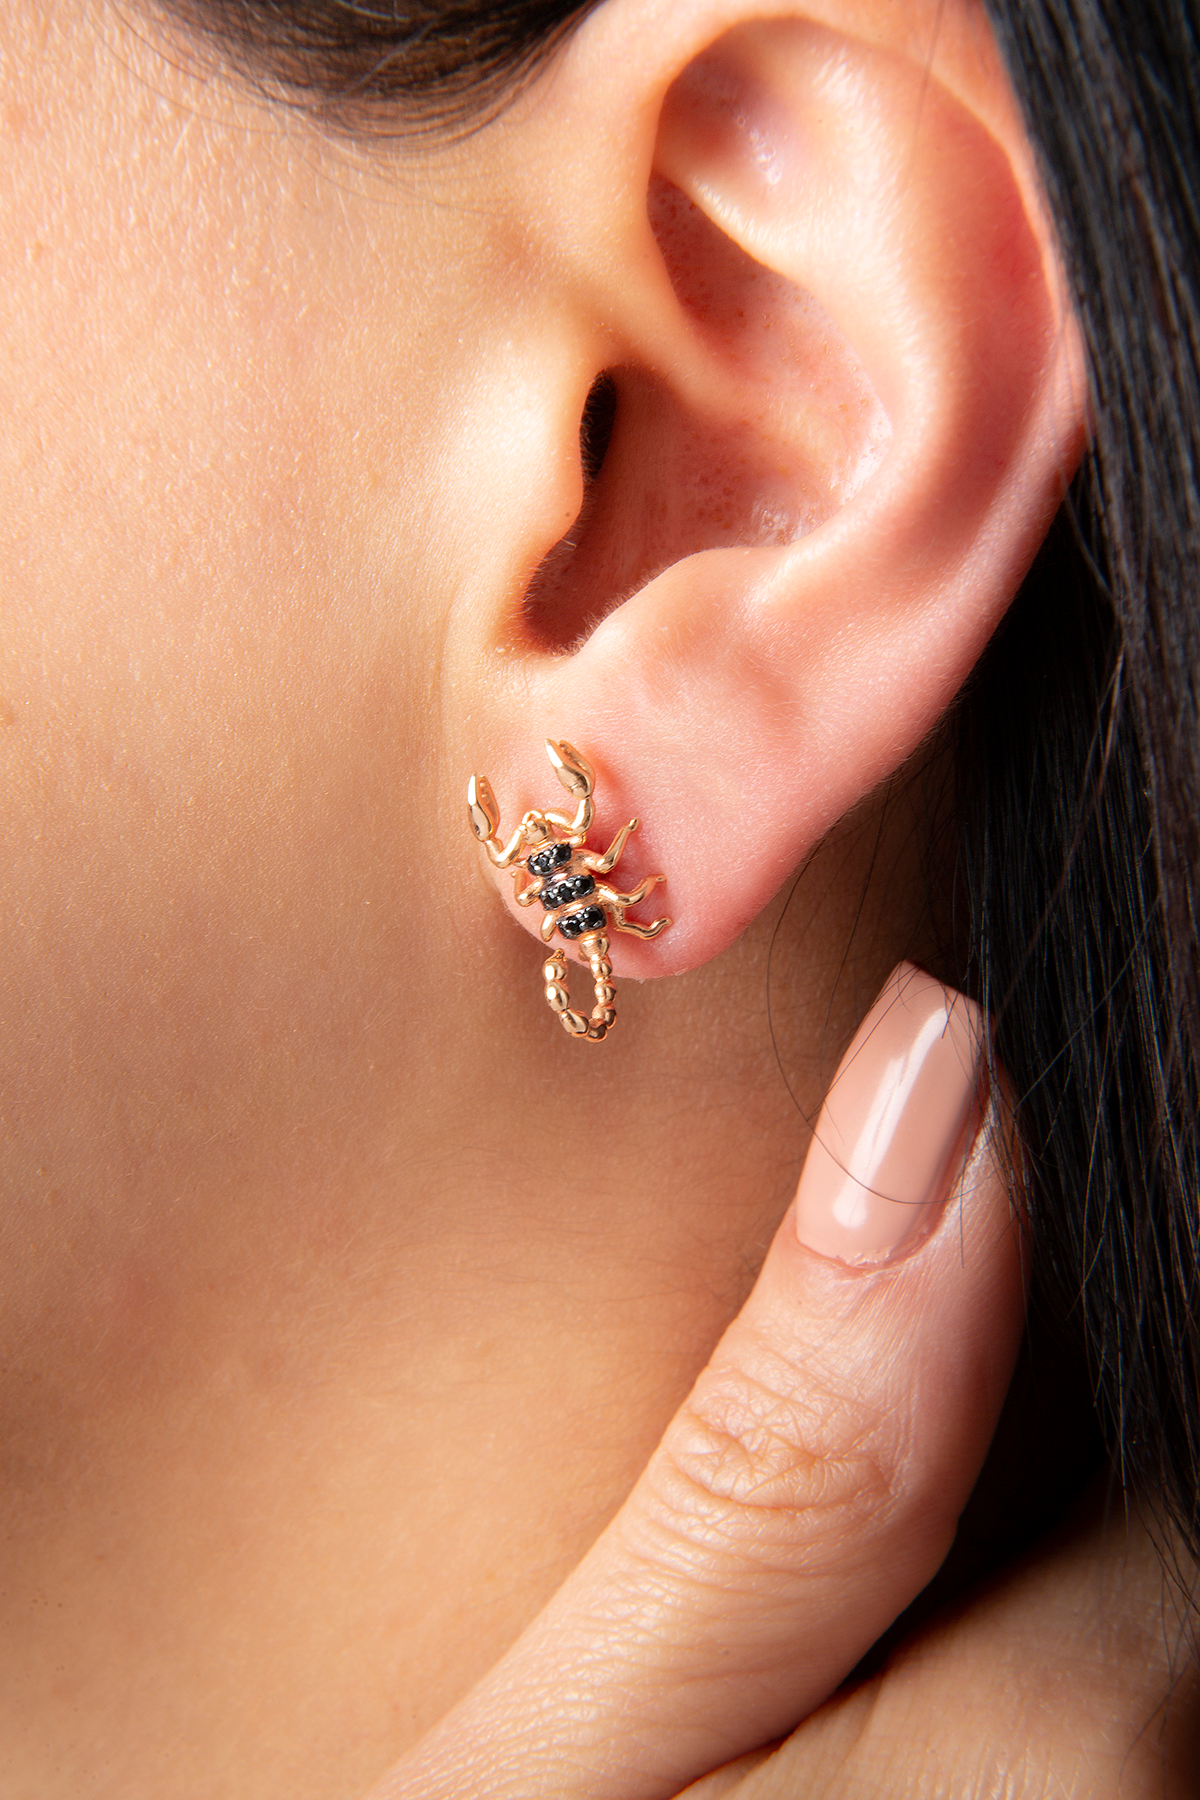 Scorpion Earring in Rose Gold - Her Story Shop